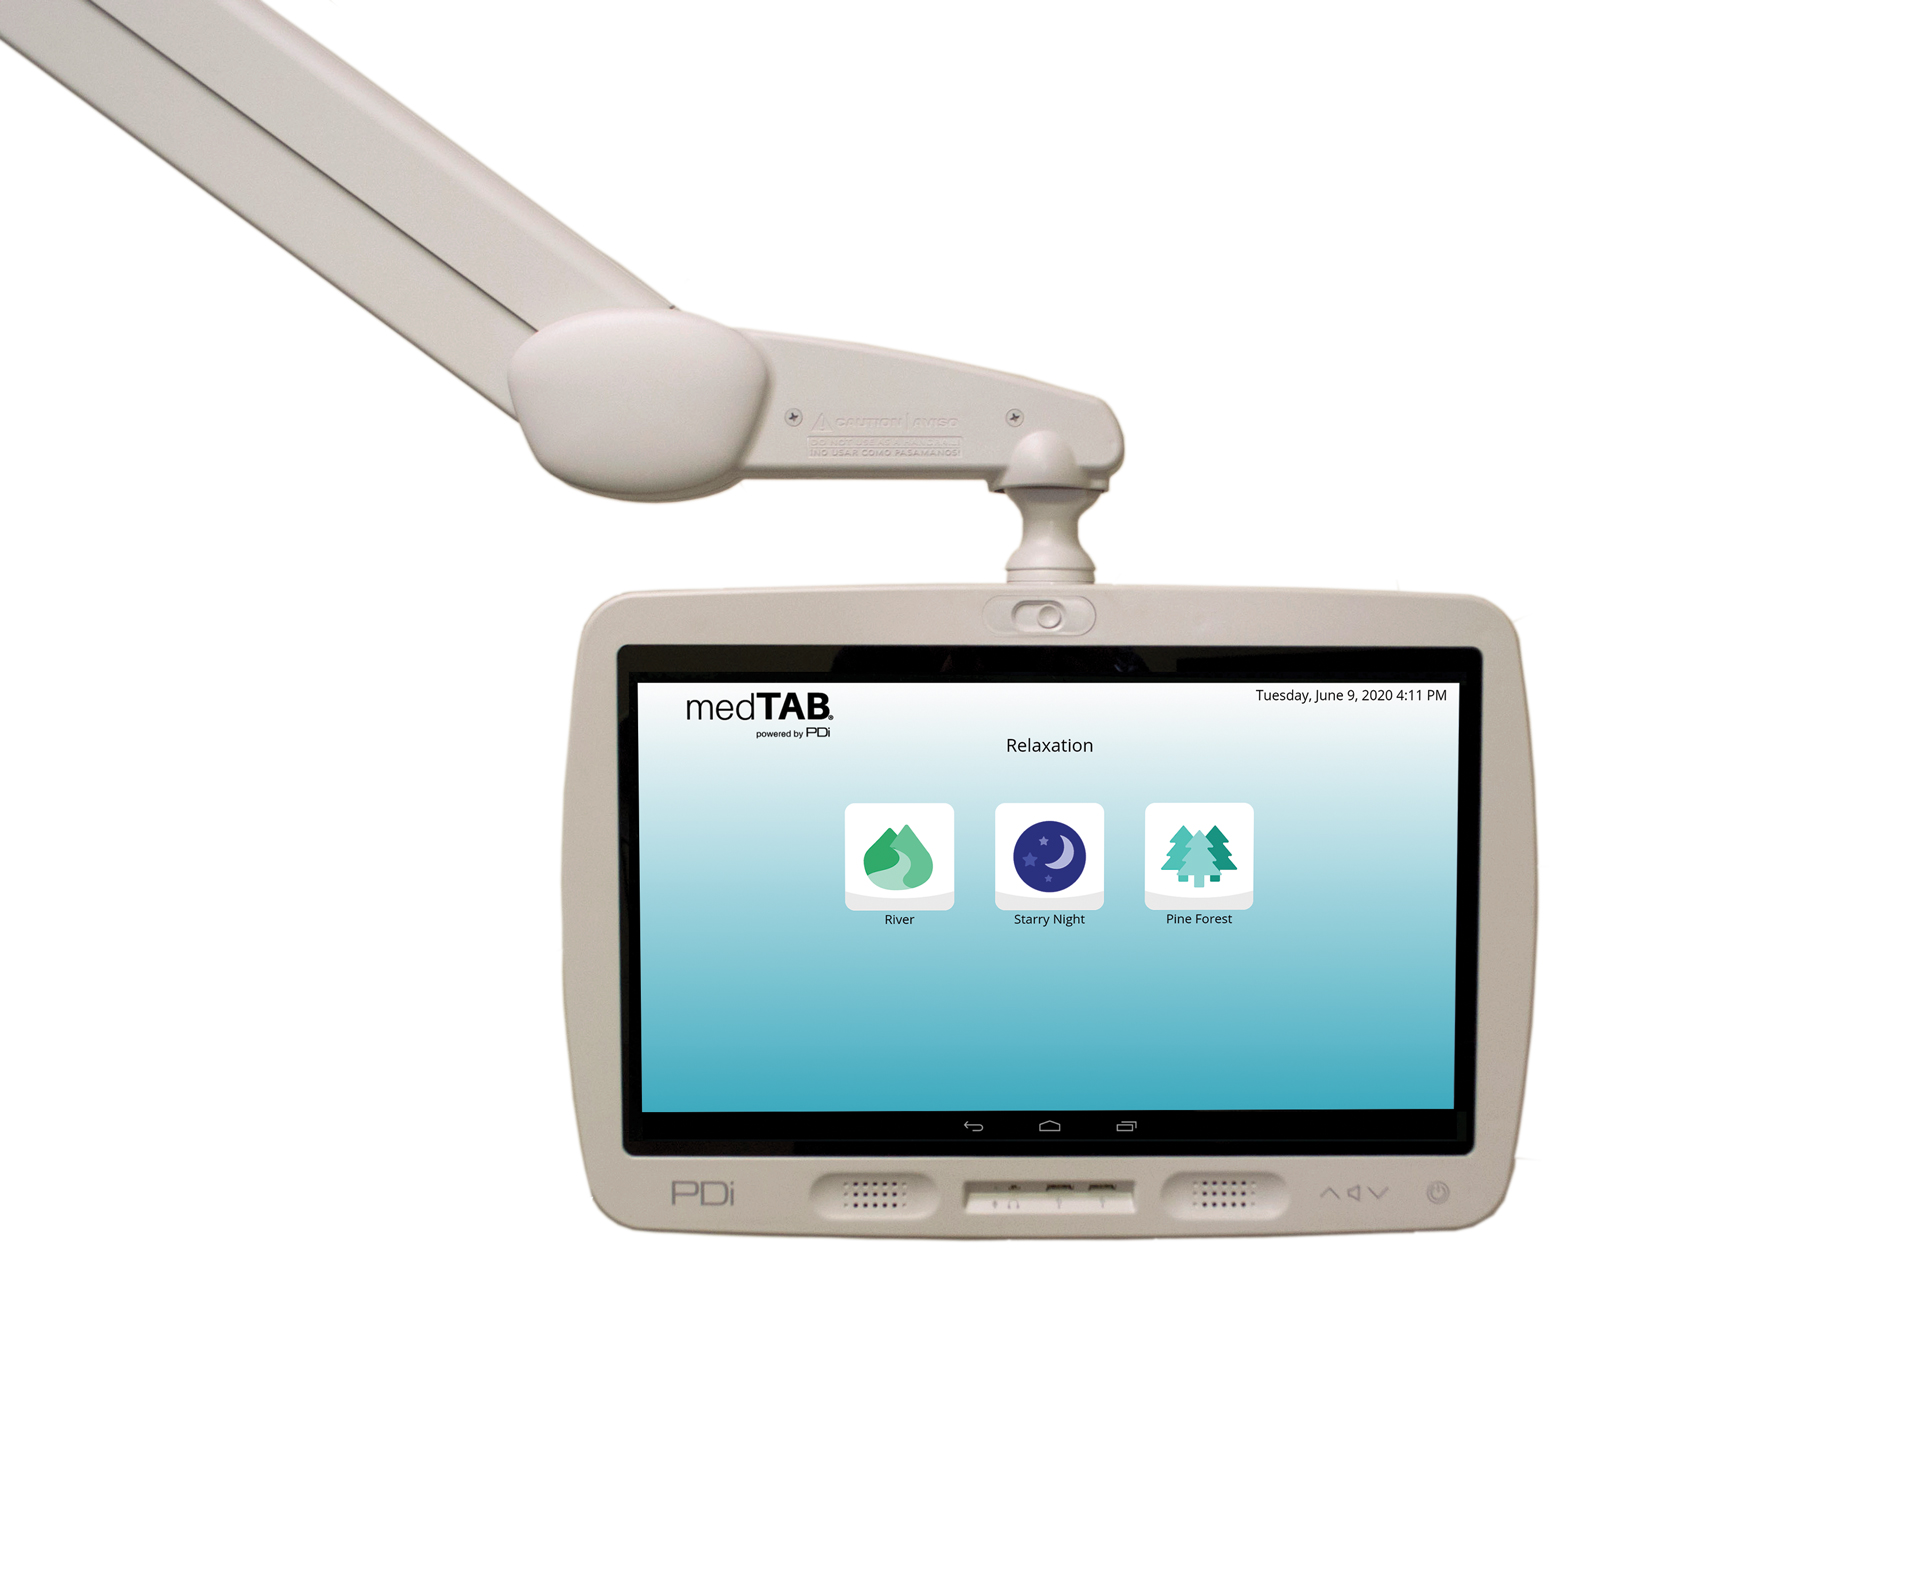 Product image of the medTAB19 healthcare television built by PDi Communication Systems, Inc. on the relaxation content screen